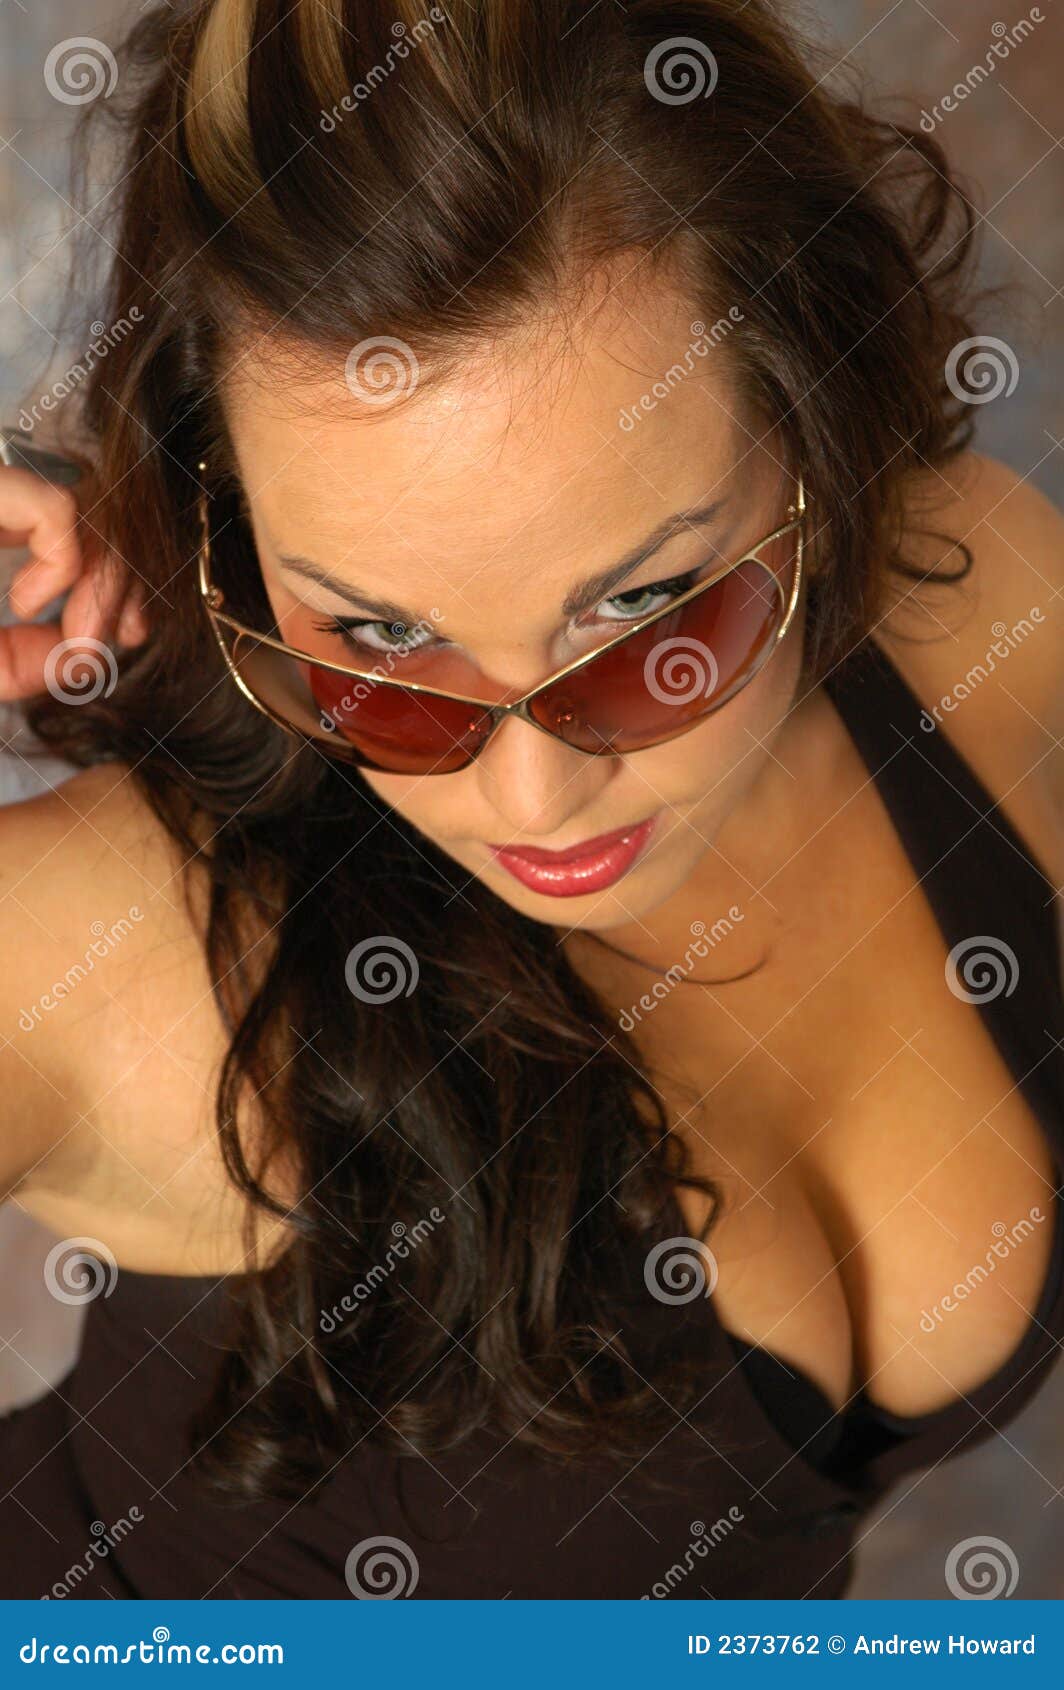 With busty glasses girl Category:Topless women